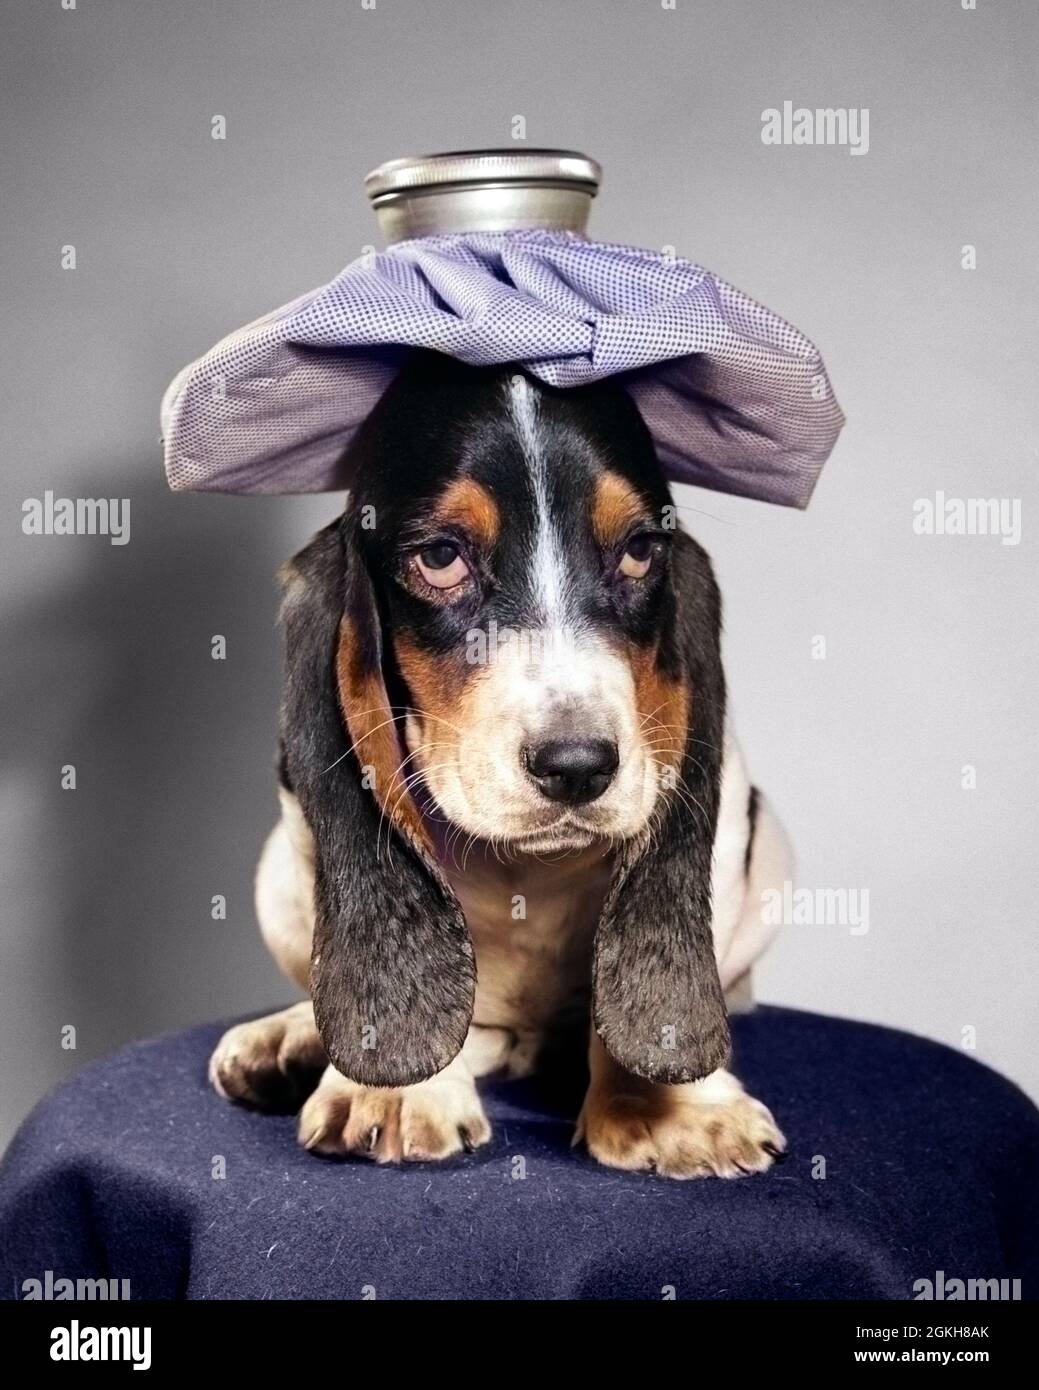 1960s UNHAPPY BASSET HOUND DOG WITH HANGOVER AND ICE PACK ON HEAD LOOKING AT CAMERA - d3229c CRS001 HARS SADNESS CANINES HOUND HUNG OVER SUFFER HURT MOOD DROOPY ICE PACK GLUM HANG OVER DROOPING FLOPPY AILING ANIMALS DOG BASSET HOUND CANINE HOT WATER BOTTLE MAMMAL MISERABLE PUP ACHE BASSET BLACK AND WHITE OLD FASHIONED WEARY Stock Photo